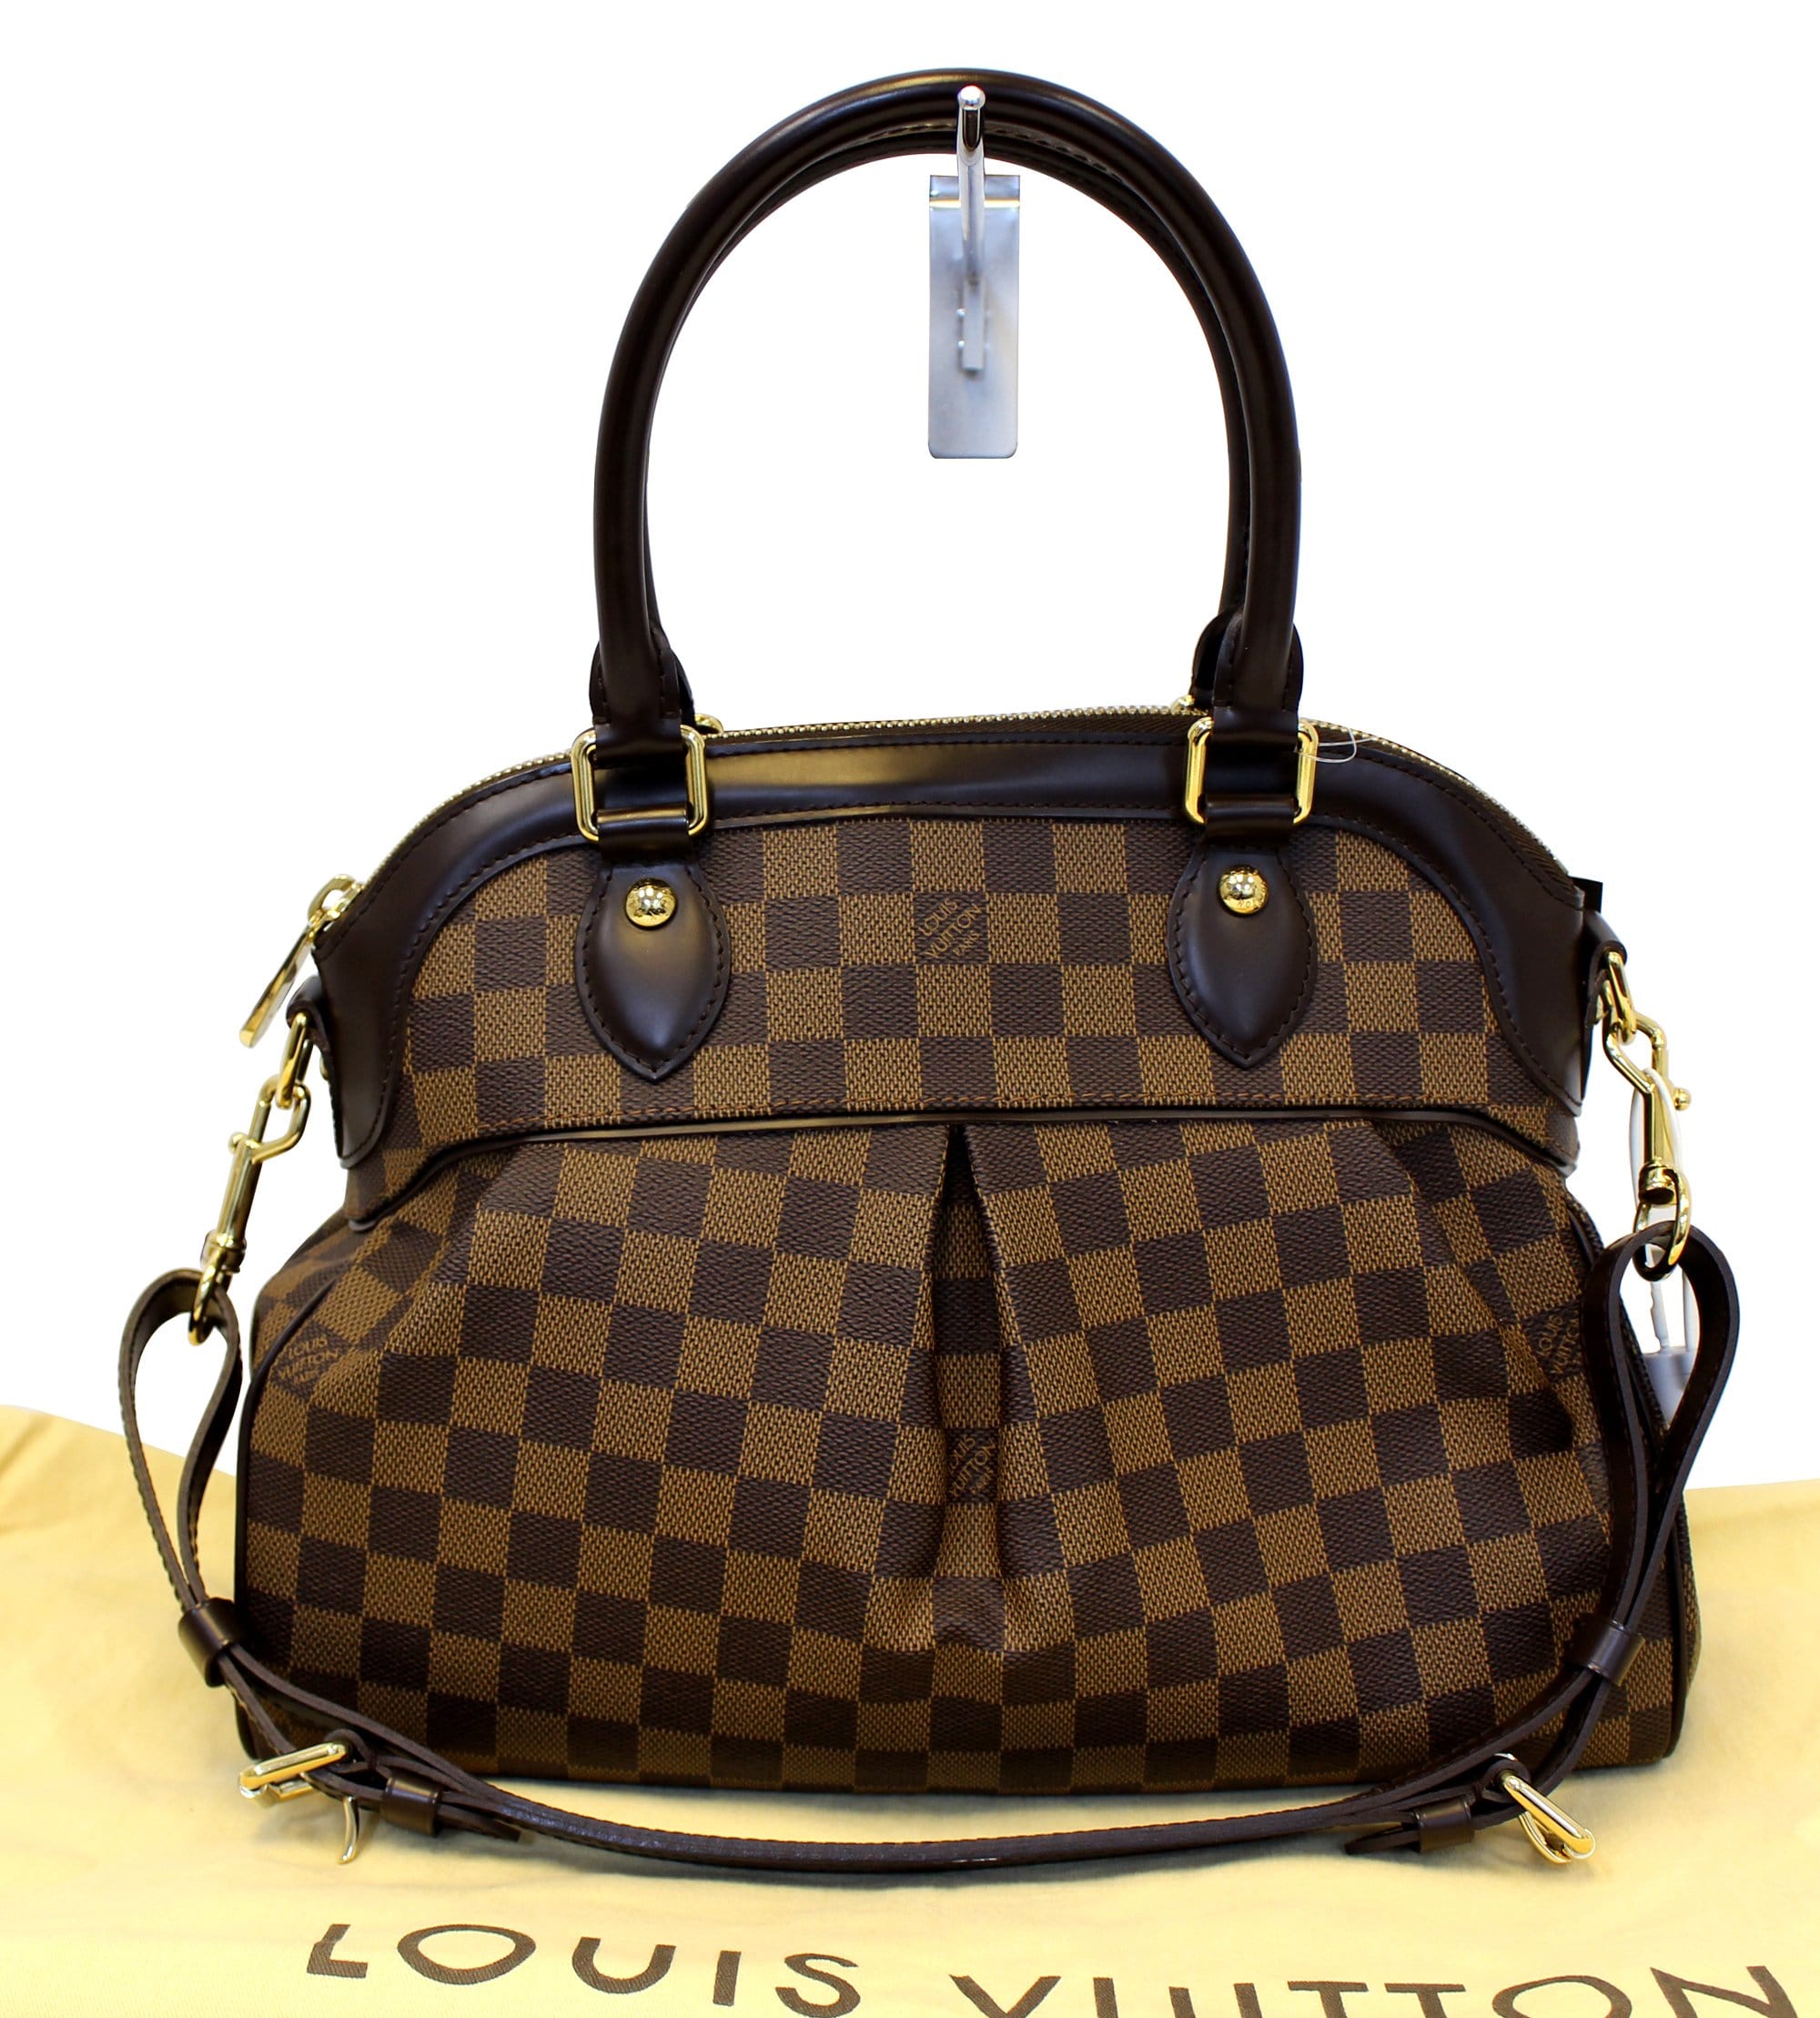 Louis Vuitton Tower damier ebene trainer brown leather 9.5 LV or